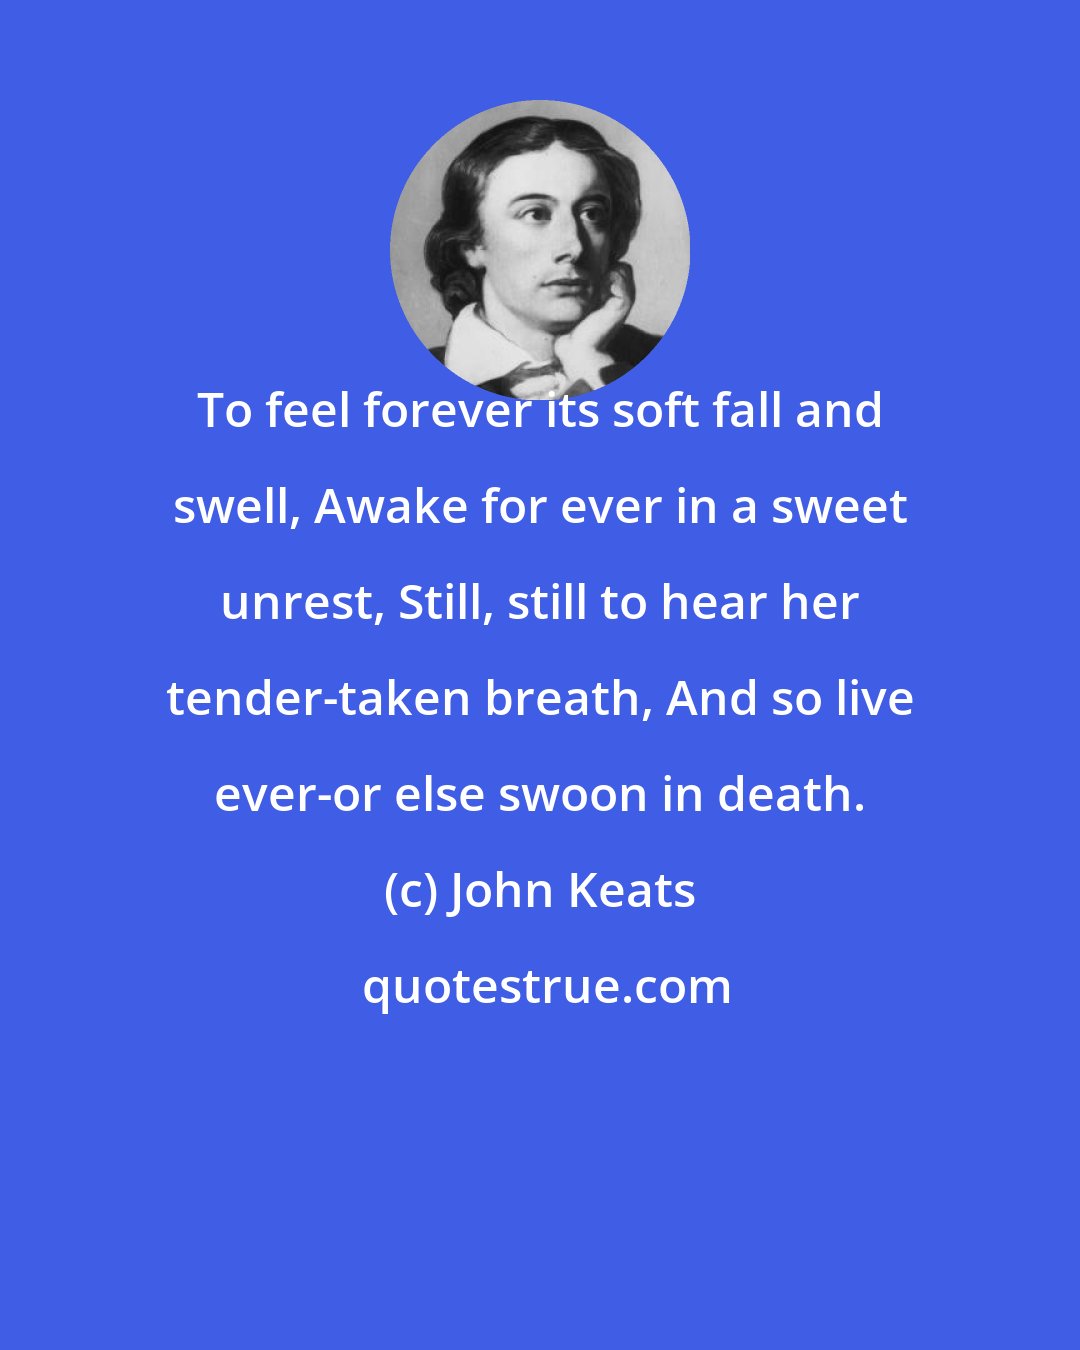 John Keats: To feel forever its soft fall and swell, Awake for ever in a sweet unrest, Still, still to hear her tender-taken breath, And so live ever-or else swoon in death.